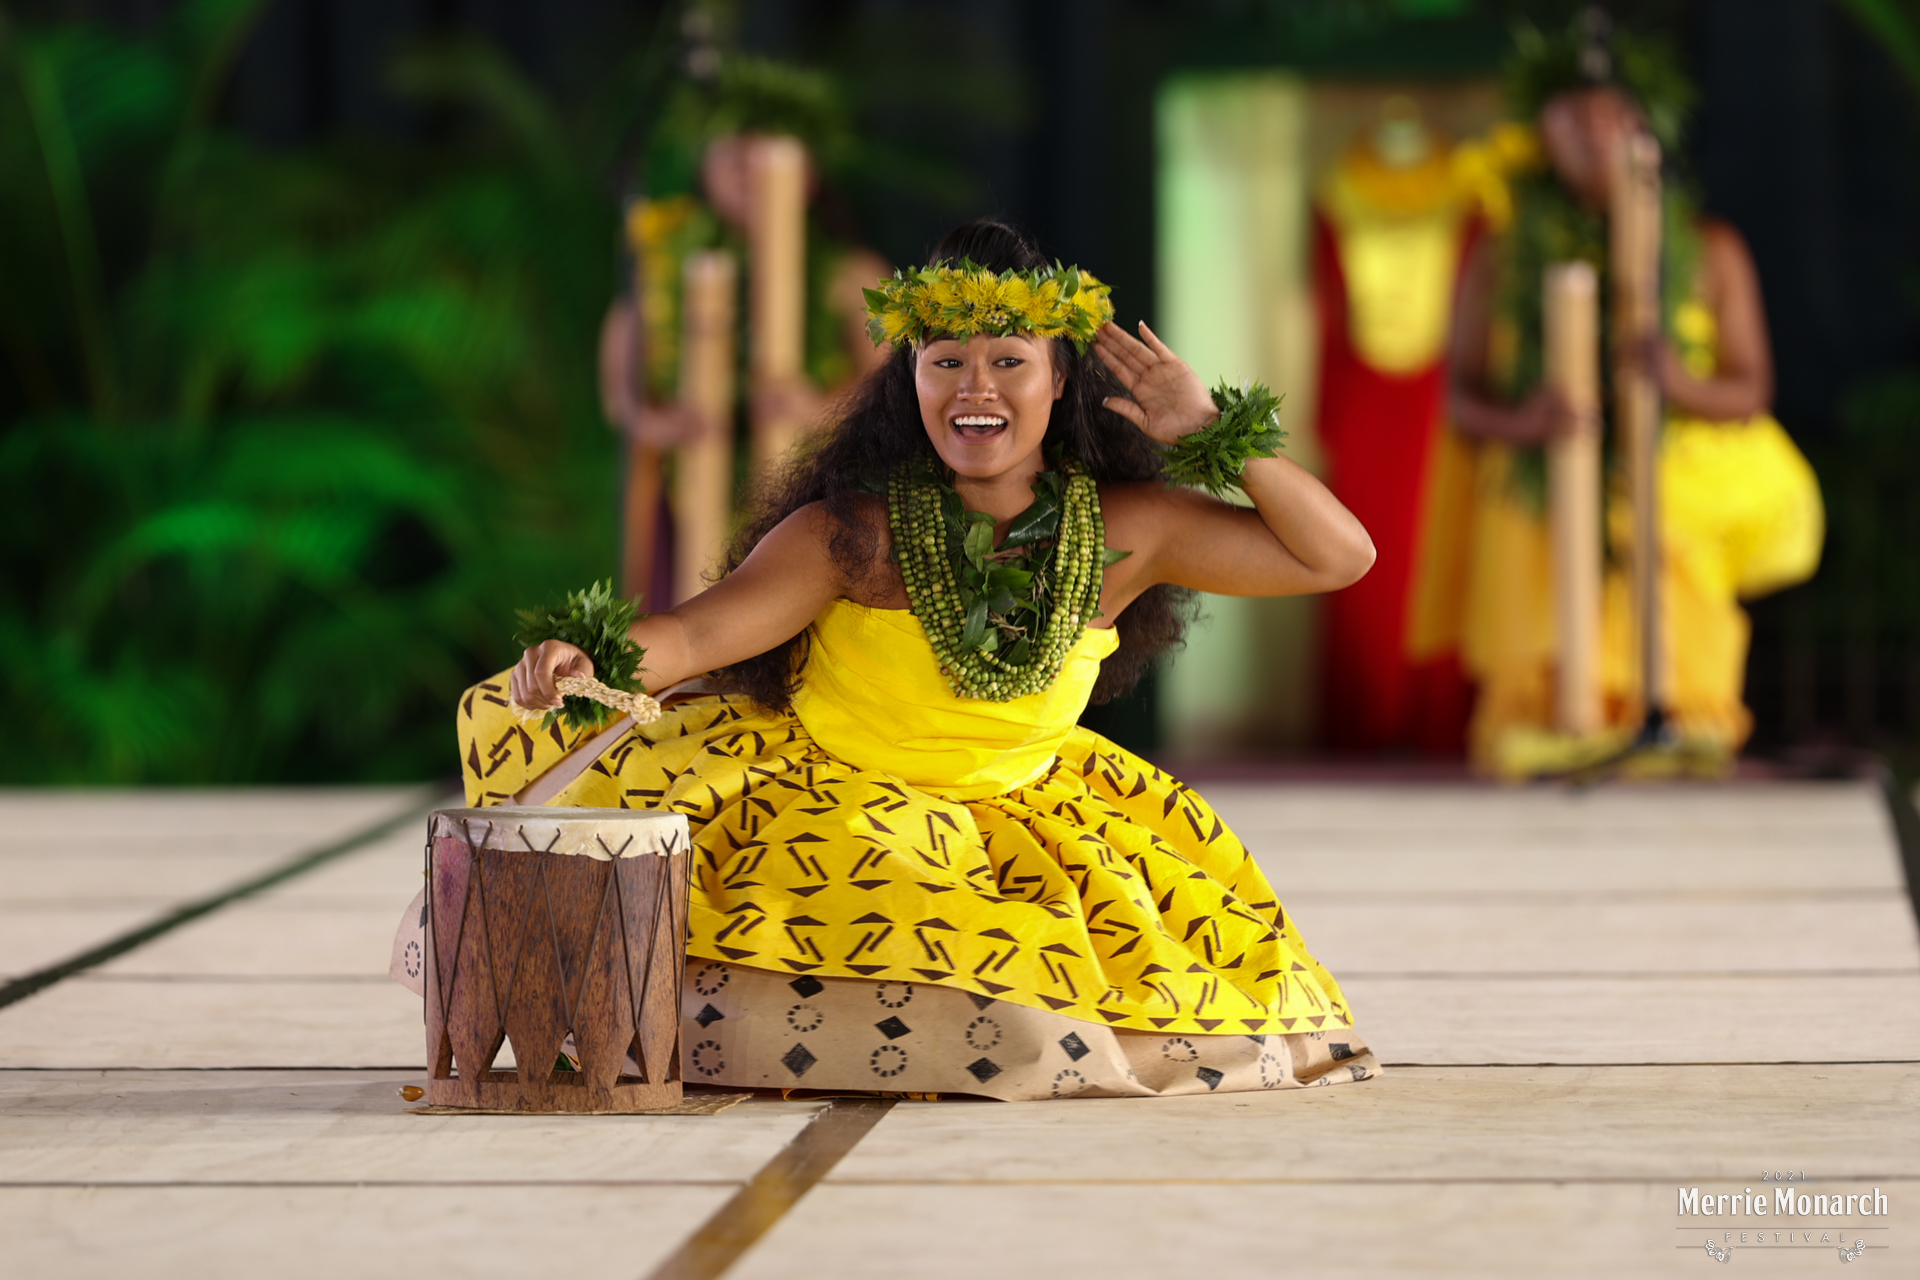 How to Watch the 2022 Merrie Monarch Festival Hawaii